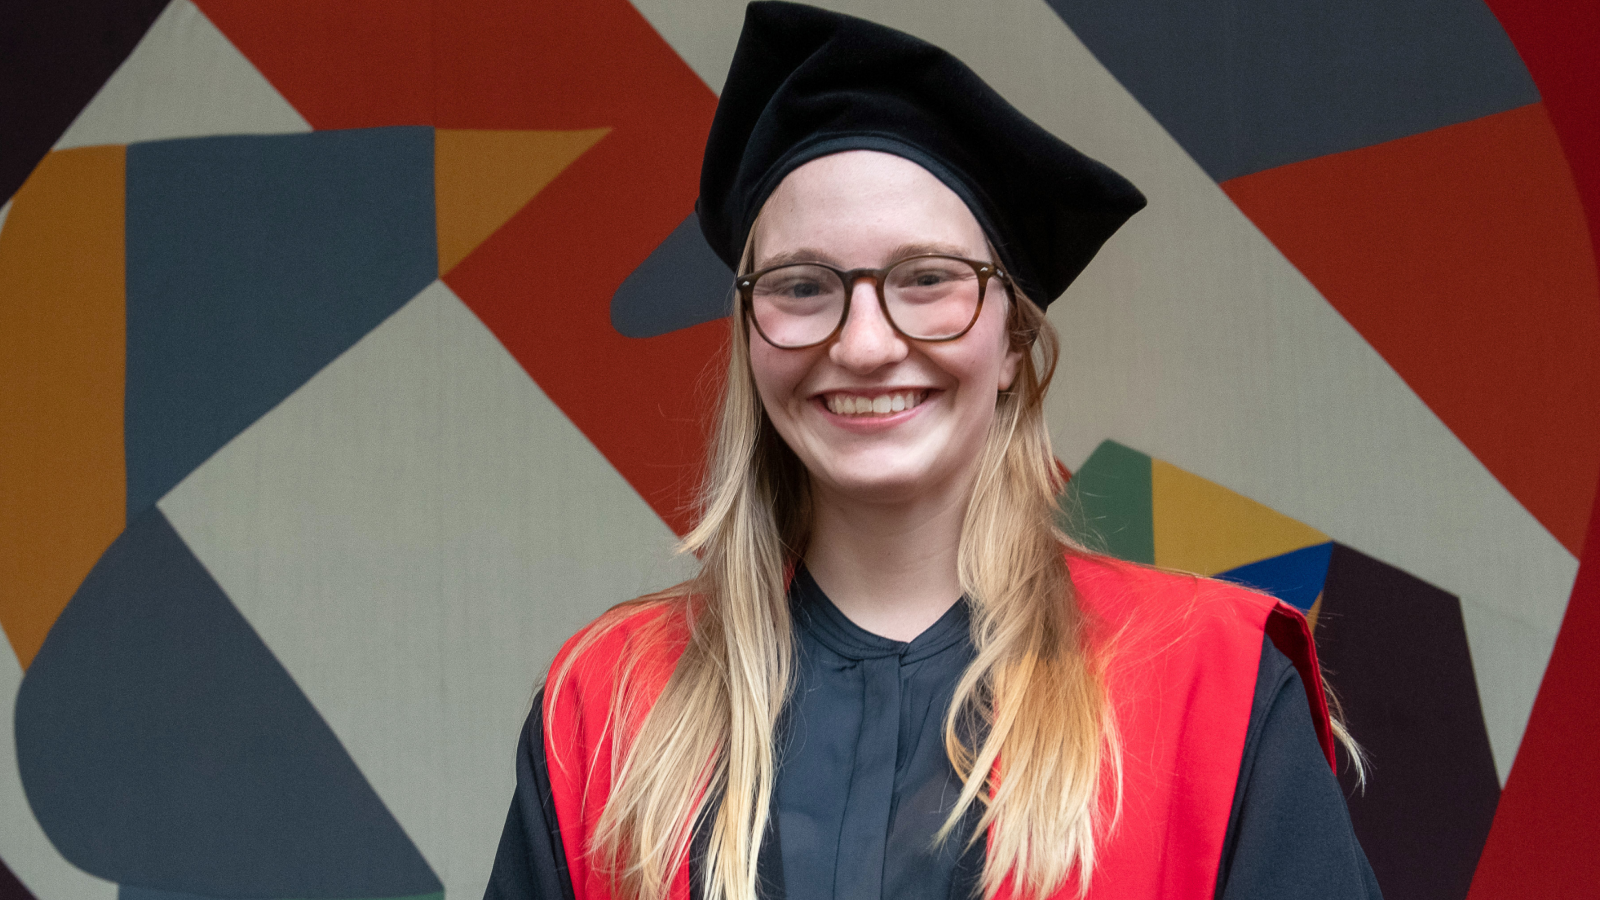 Girl with long blonde hair grinning, wearing a tricorn hat and doctoral robes